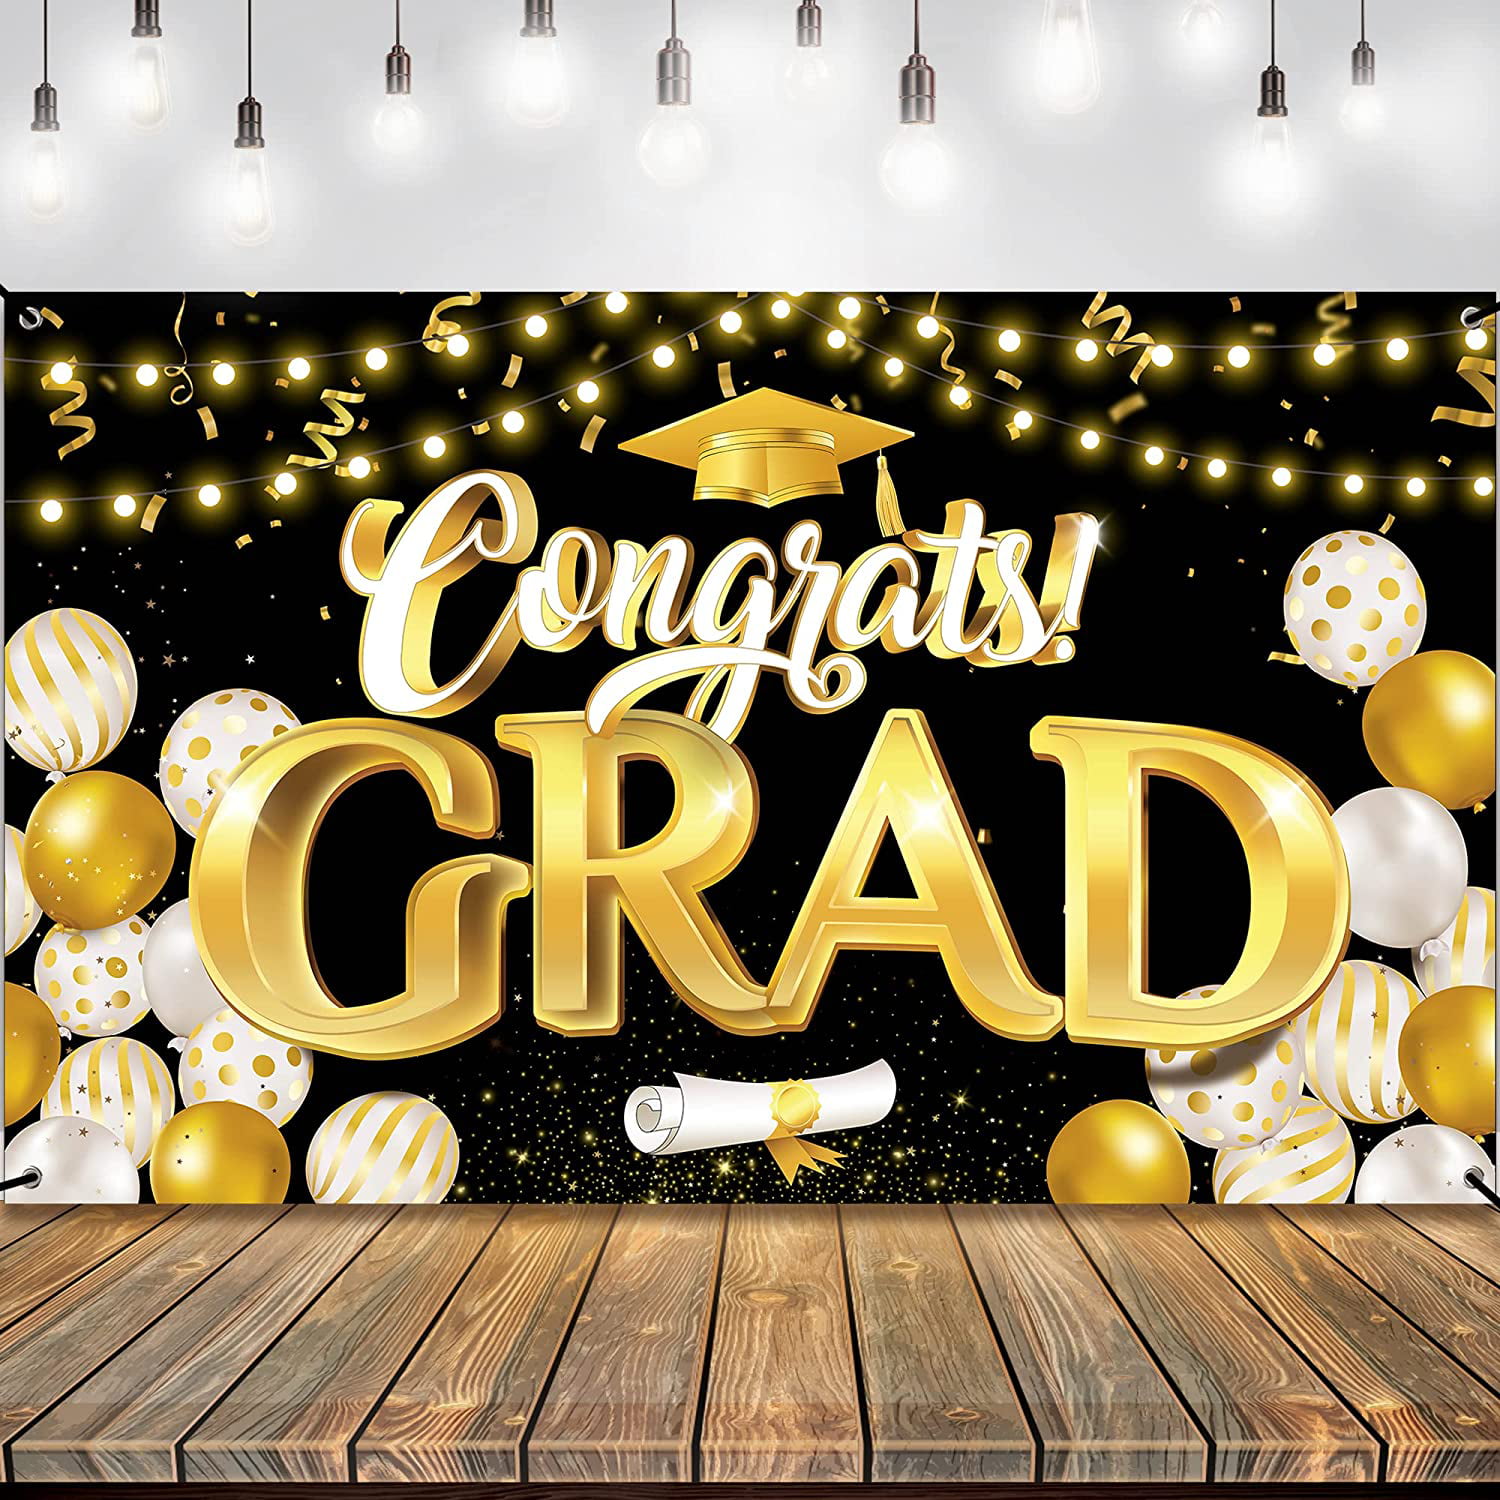 72x44 Inch Graduation Banner for Graduation Party Decorations 2022 Congratulations Banner for Black and Gold Graduation Decorations 2022 Graduation Backdrop Congrats Grad Banner XtraLarge 